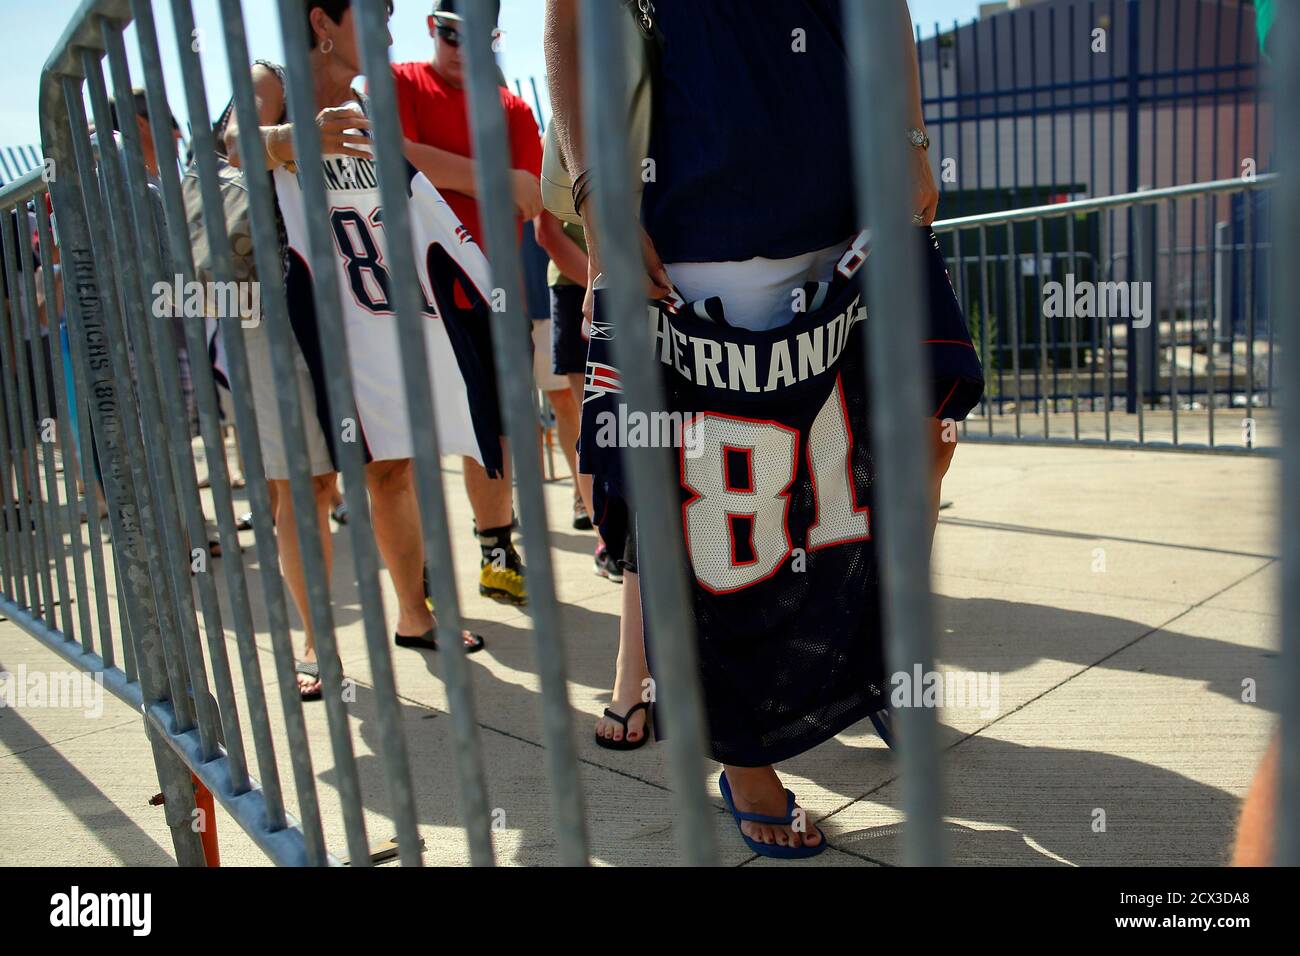 Fans wait in line behind security barriers to exchange jerseys of former  New England Patriots player Aaron Hernandez at the club's merchandise shop  in Foxborough, Massachusetts July 6, 2013. The Patriots offered